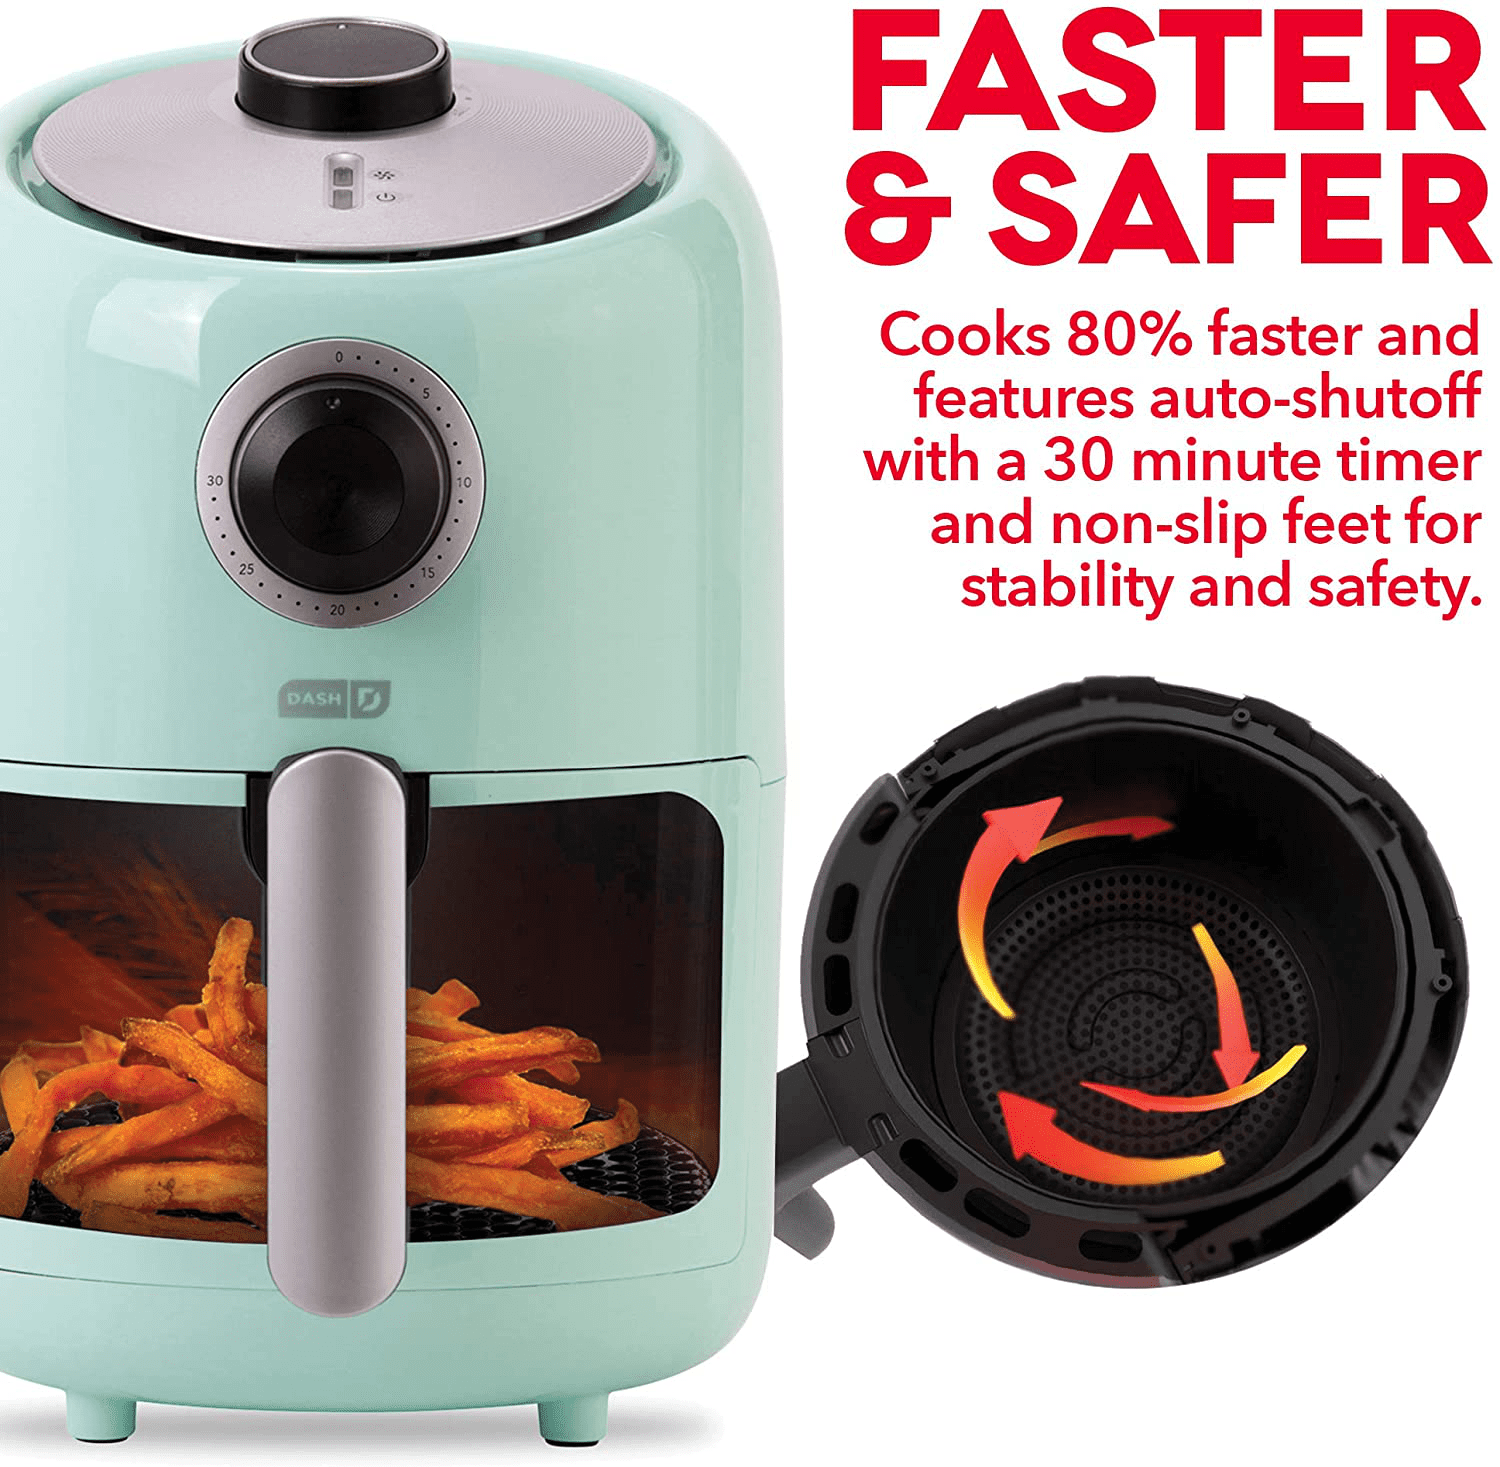  DASH Deluxe Electric Air Fryer with Temperature Control, 6qt -  White & DASH Quick-Read Meat Thermometer, Waterproof Kitchen and Outdoor  Food Cooking Thermometer with Digital LCD Display - White: Home 